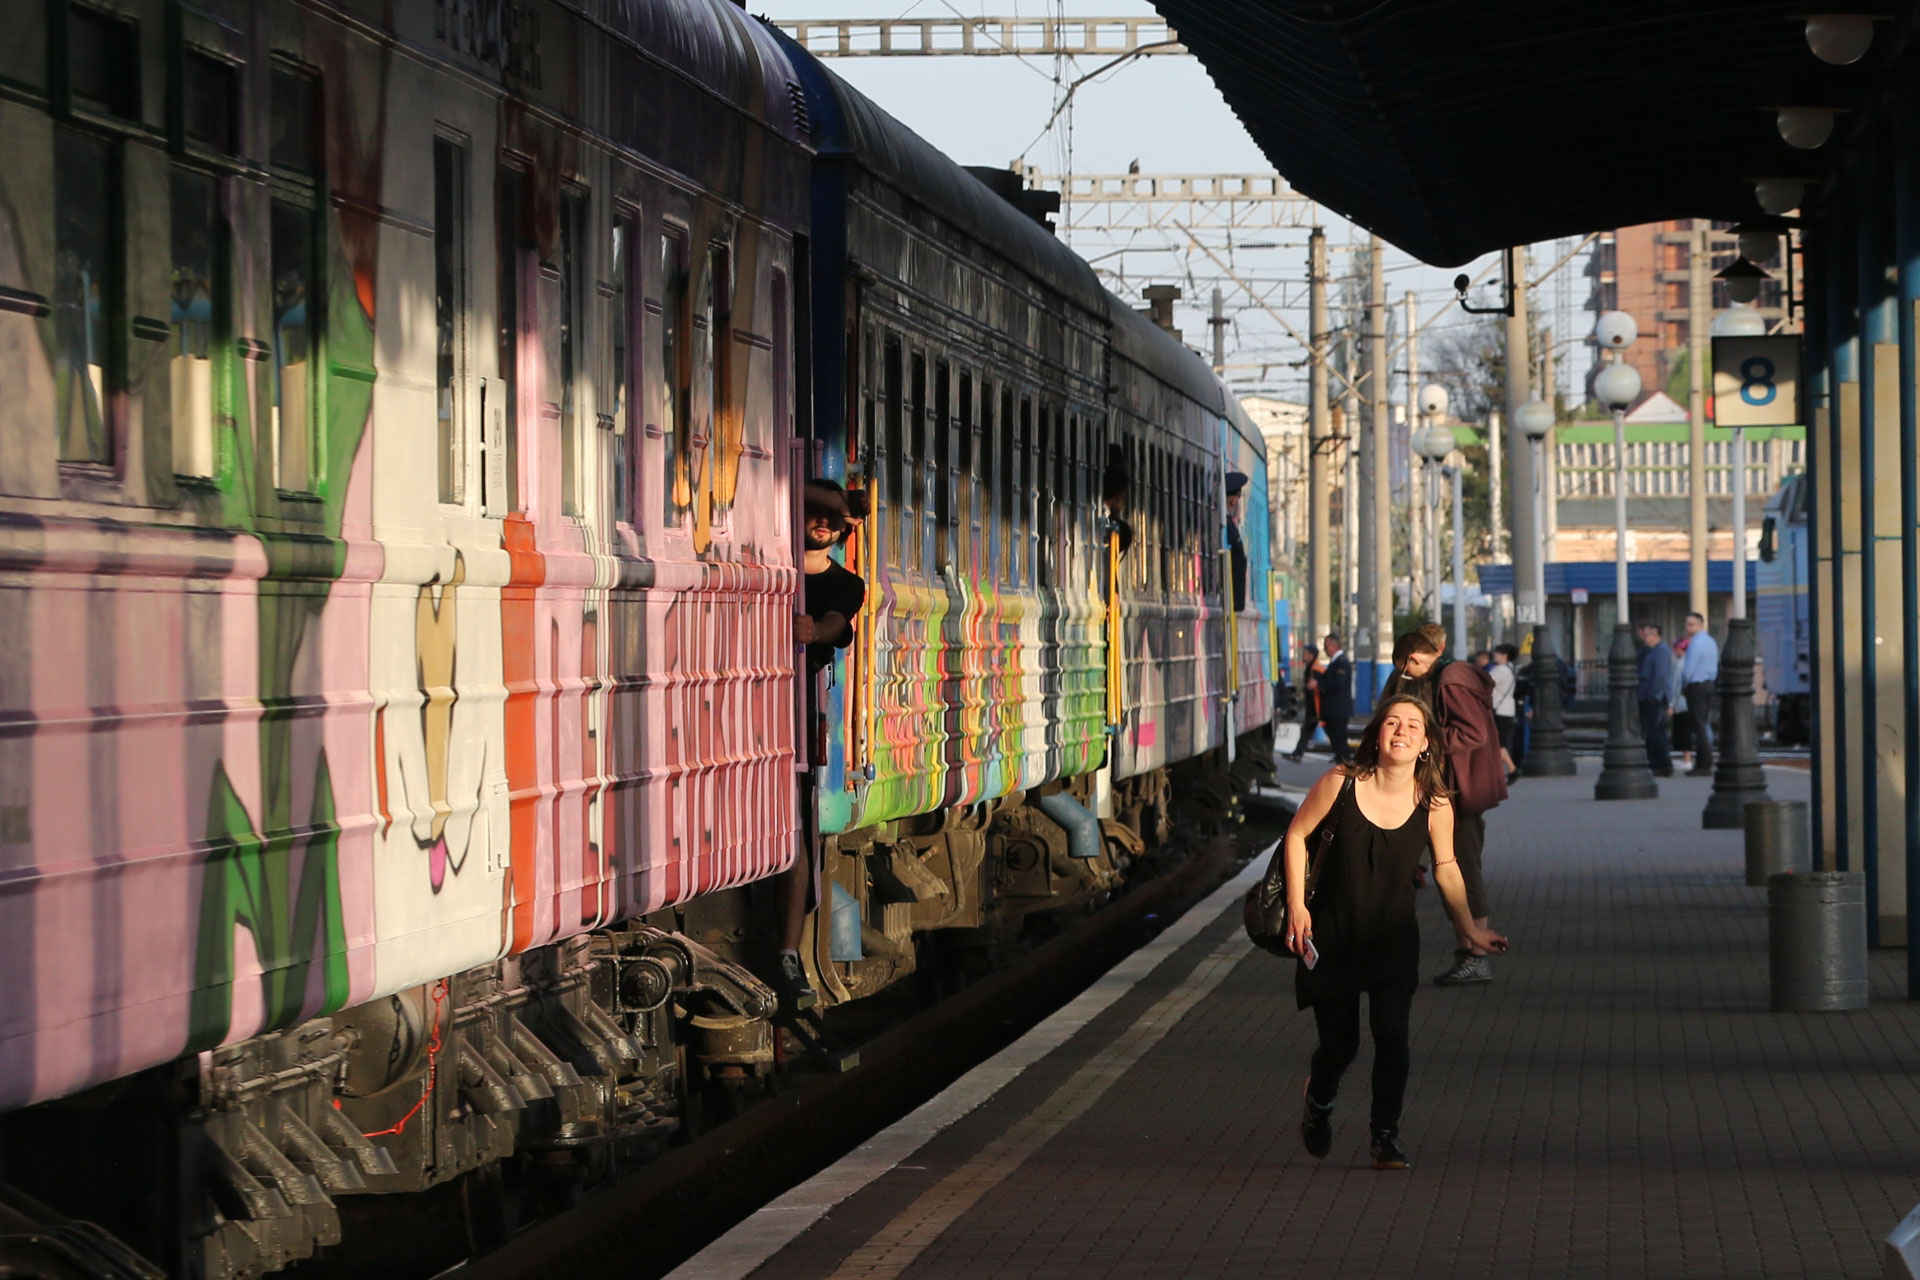 GogolTrain: Europe’s first art train amps up Ukraine’s cultural mobility ~~